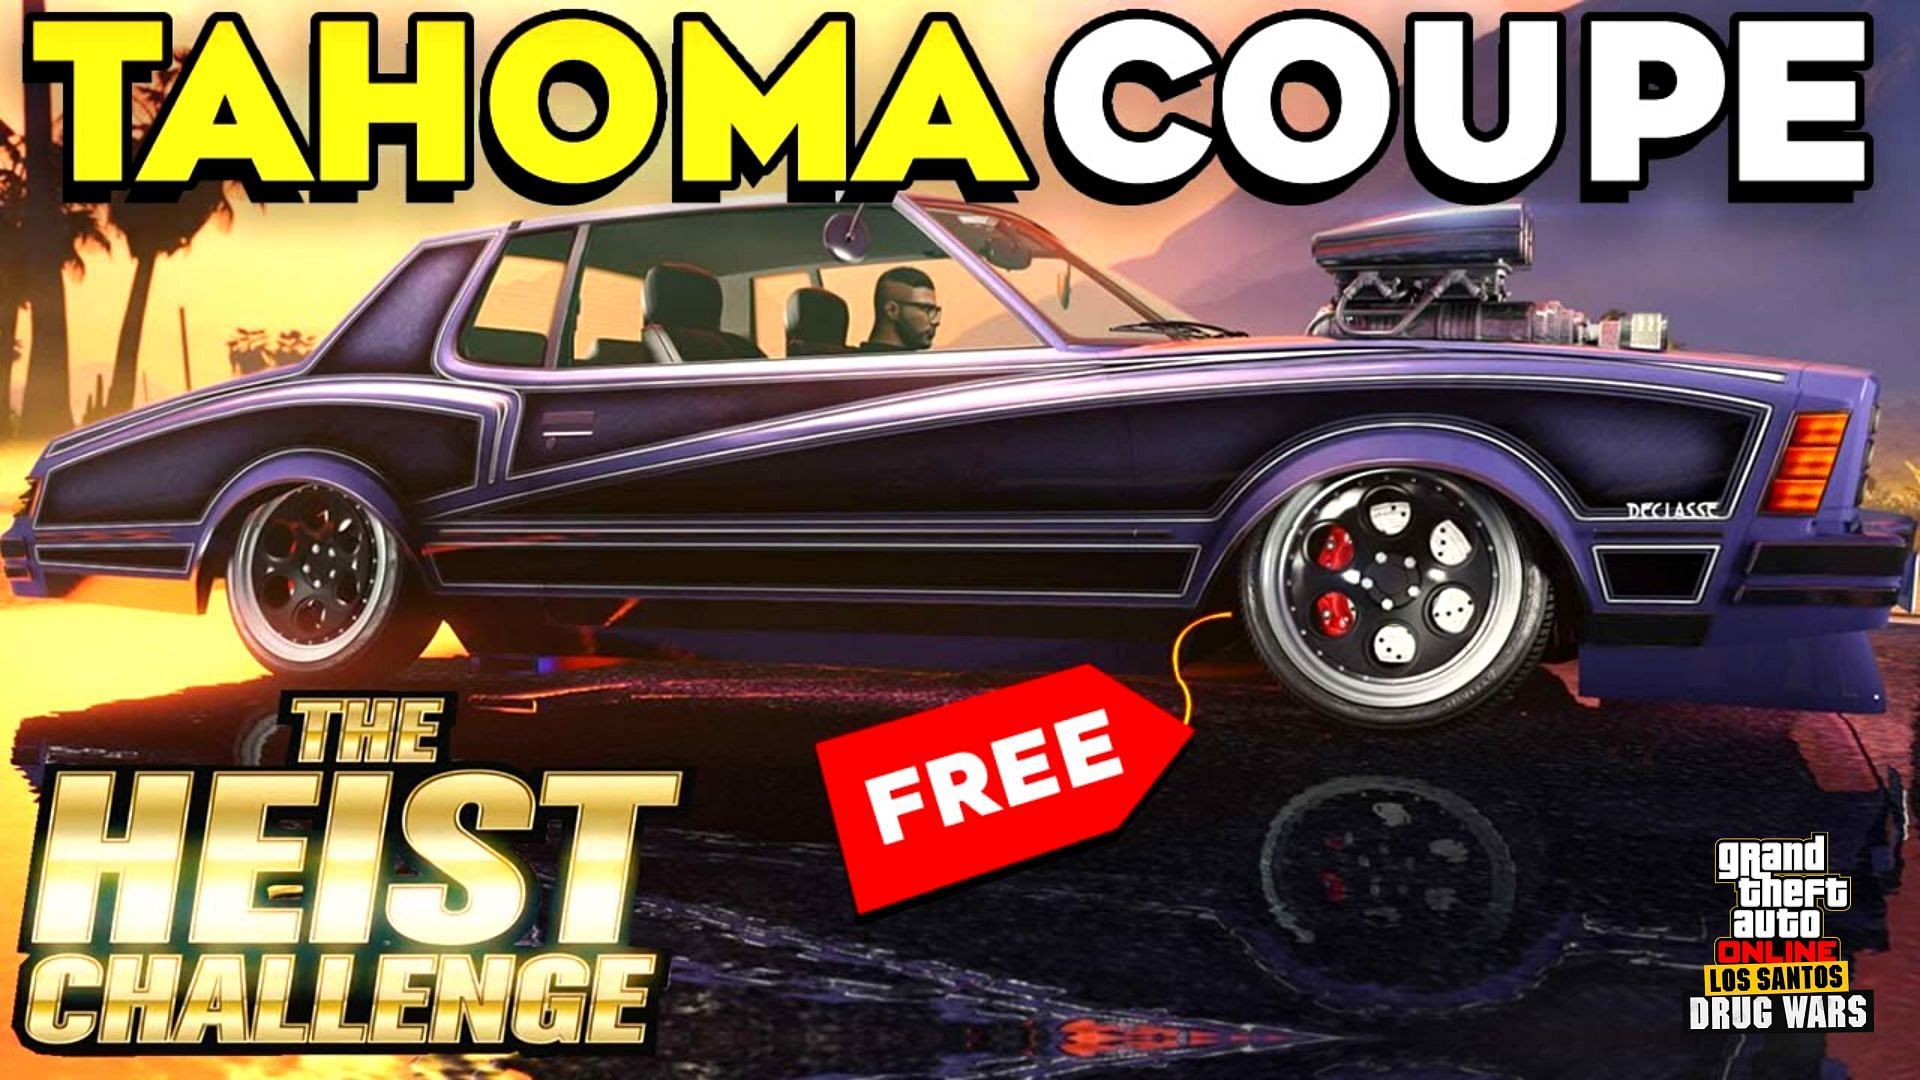 A brief about the free Declasse Tahoma Coupe available in GTA Online this weekend as part of the Los Santos Drug Wars DLC (Image via Joe Iz Gaming on YouTube)